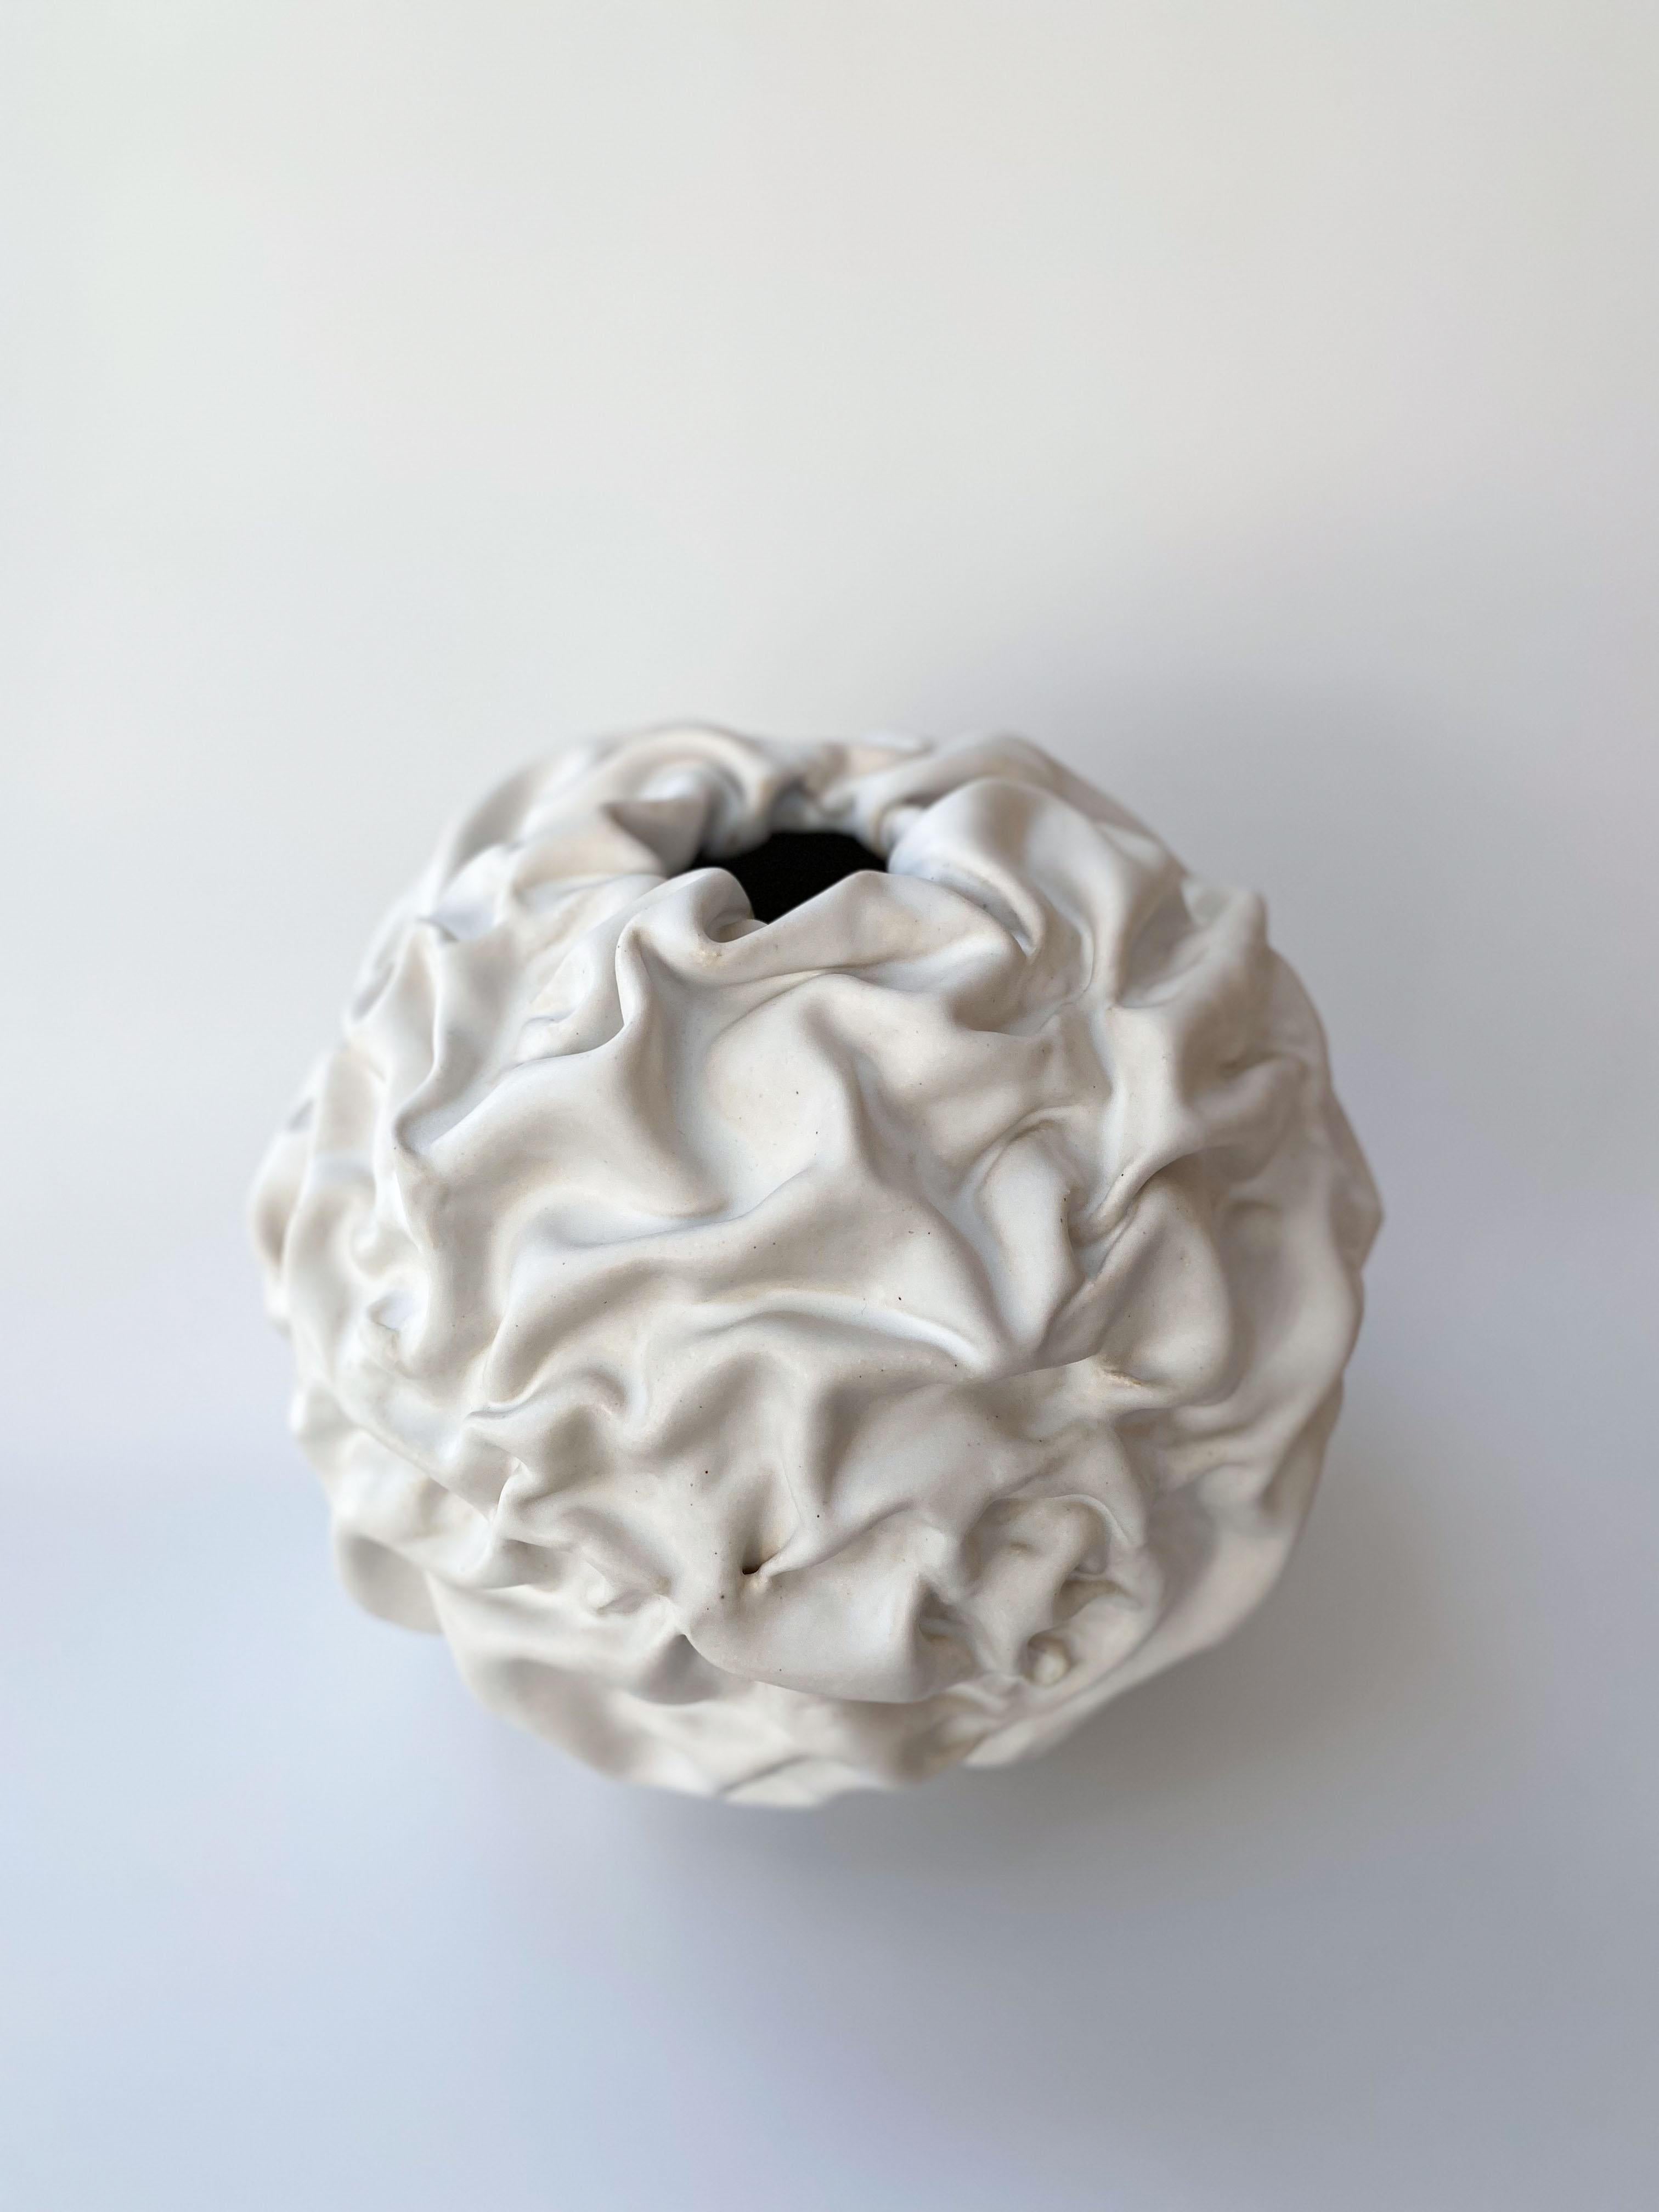 Morel sculpture I by Sophie Rogers
Dimensions: W 33 x H 31
Materials: Ceramic, glaze
Other glaze colors available.

Inspired by the forms of nature, the origin comes from the mushroom Morel`s expression. A game with shadows and light. The size